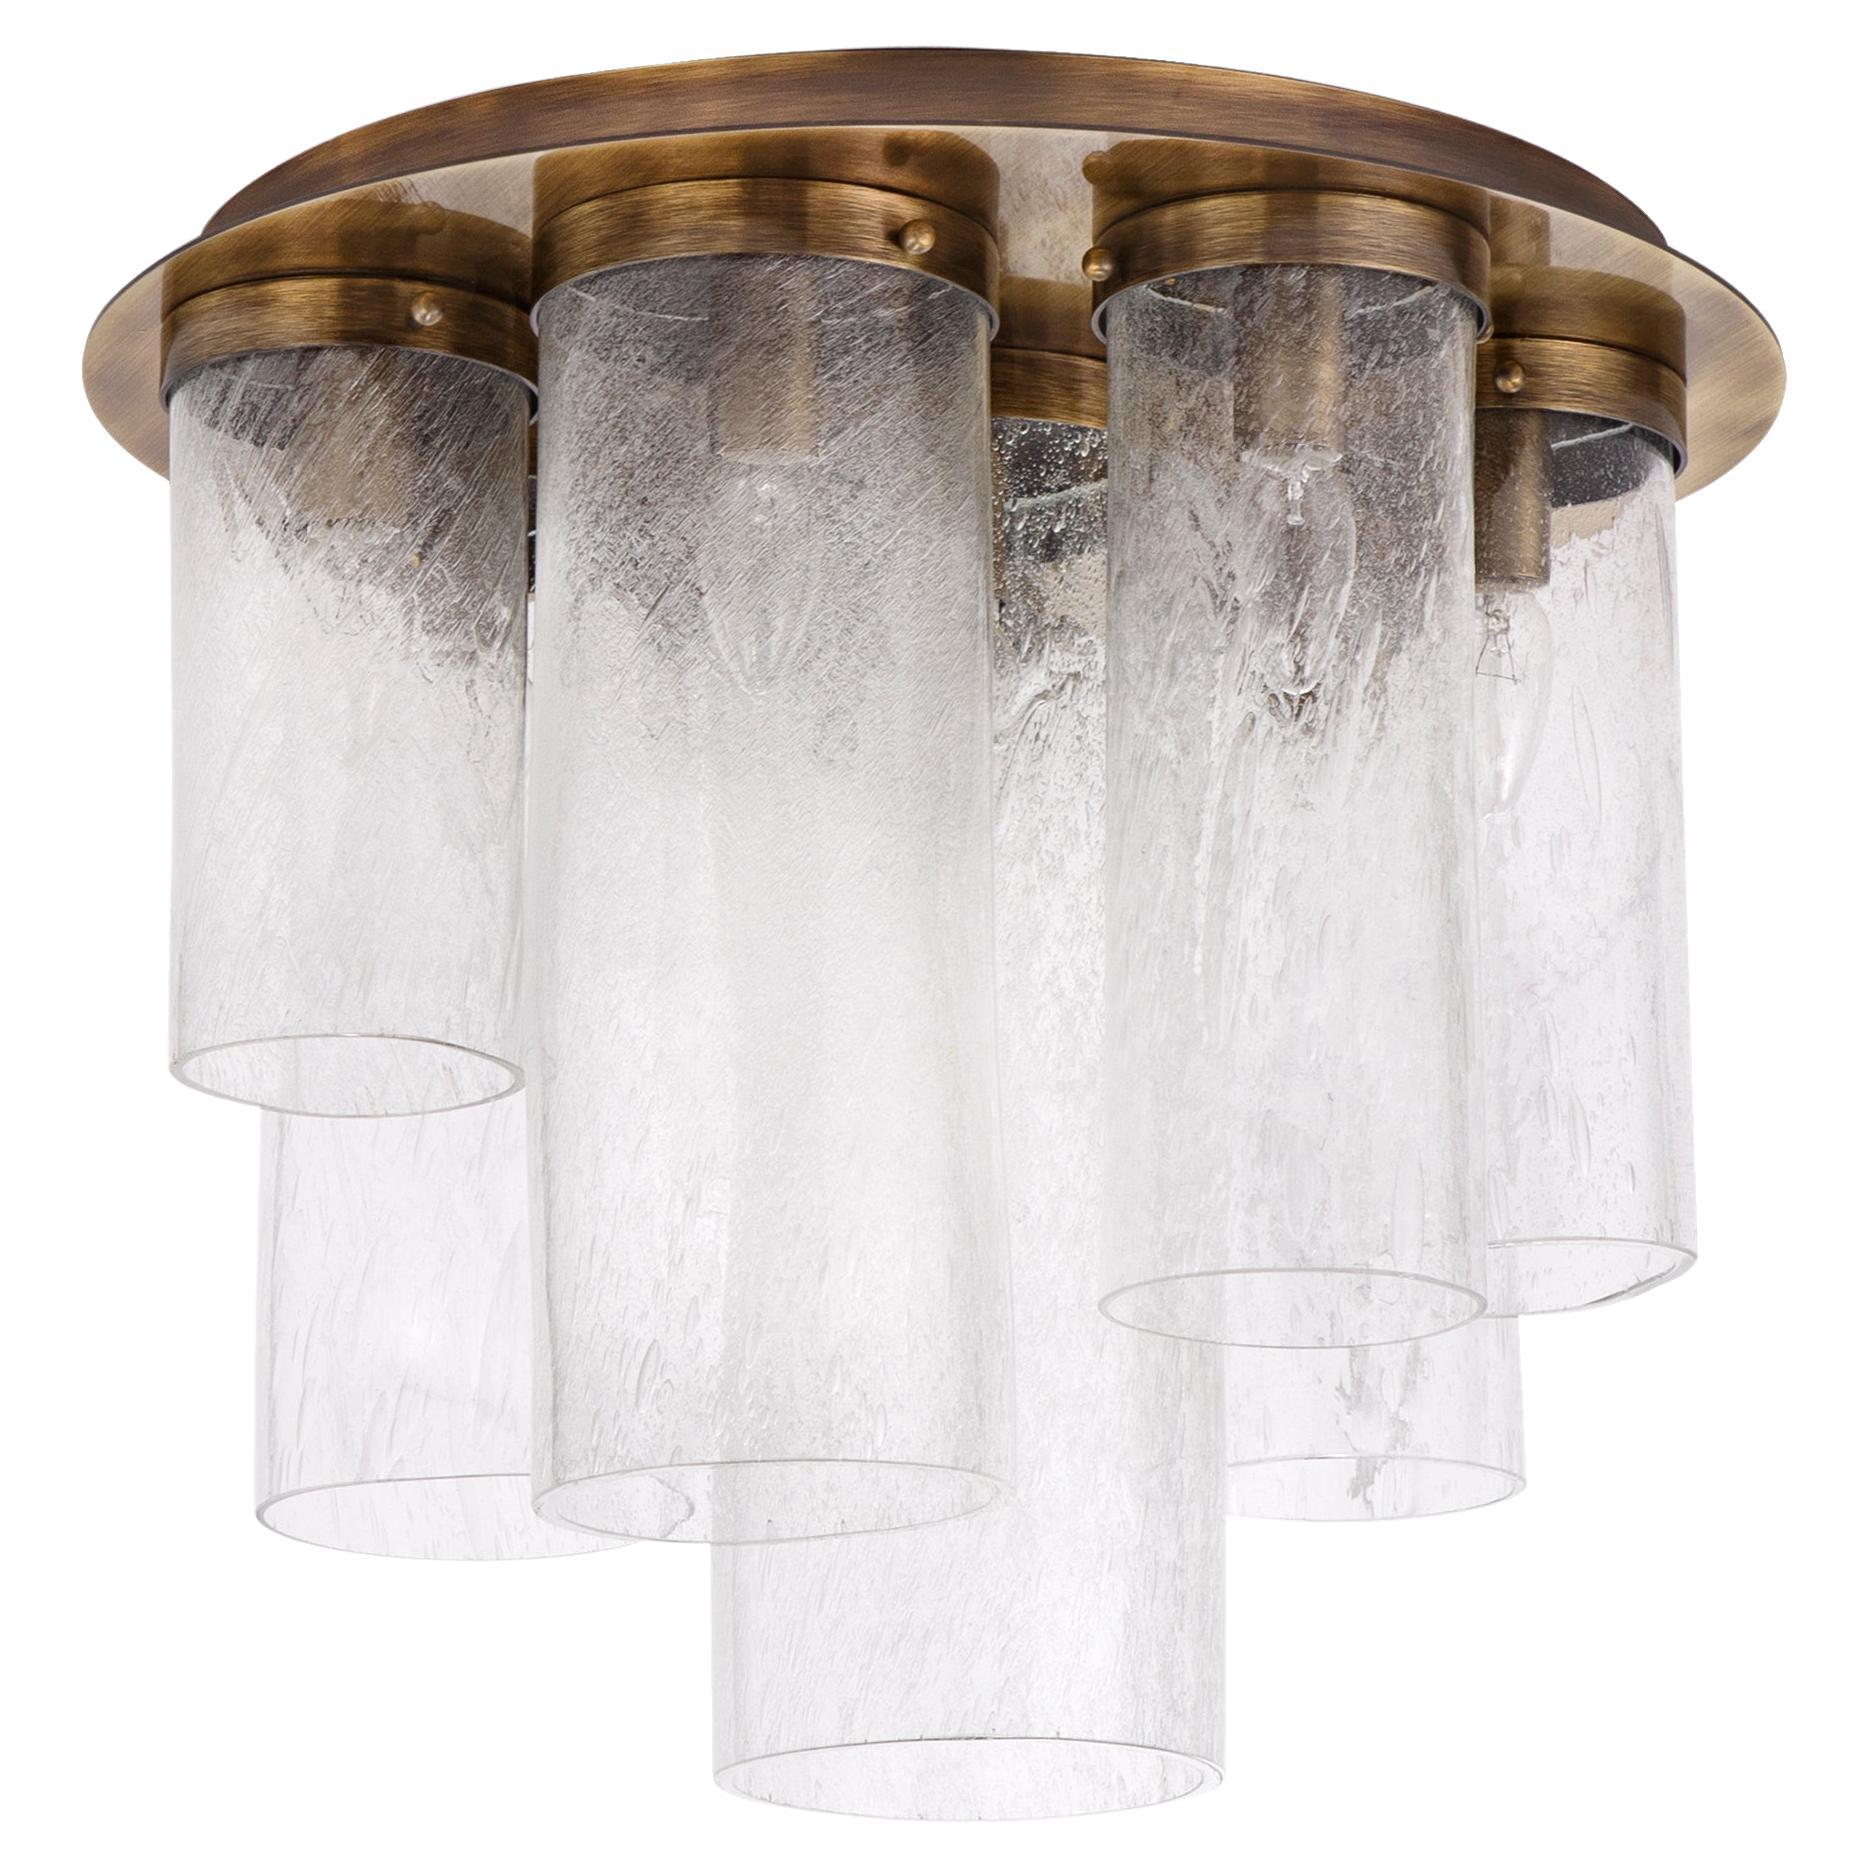 Artistic Ceiling 8clear Glass Tubes, Burnish Brass Fixture Skyline by Multiforme For Sale